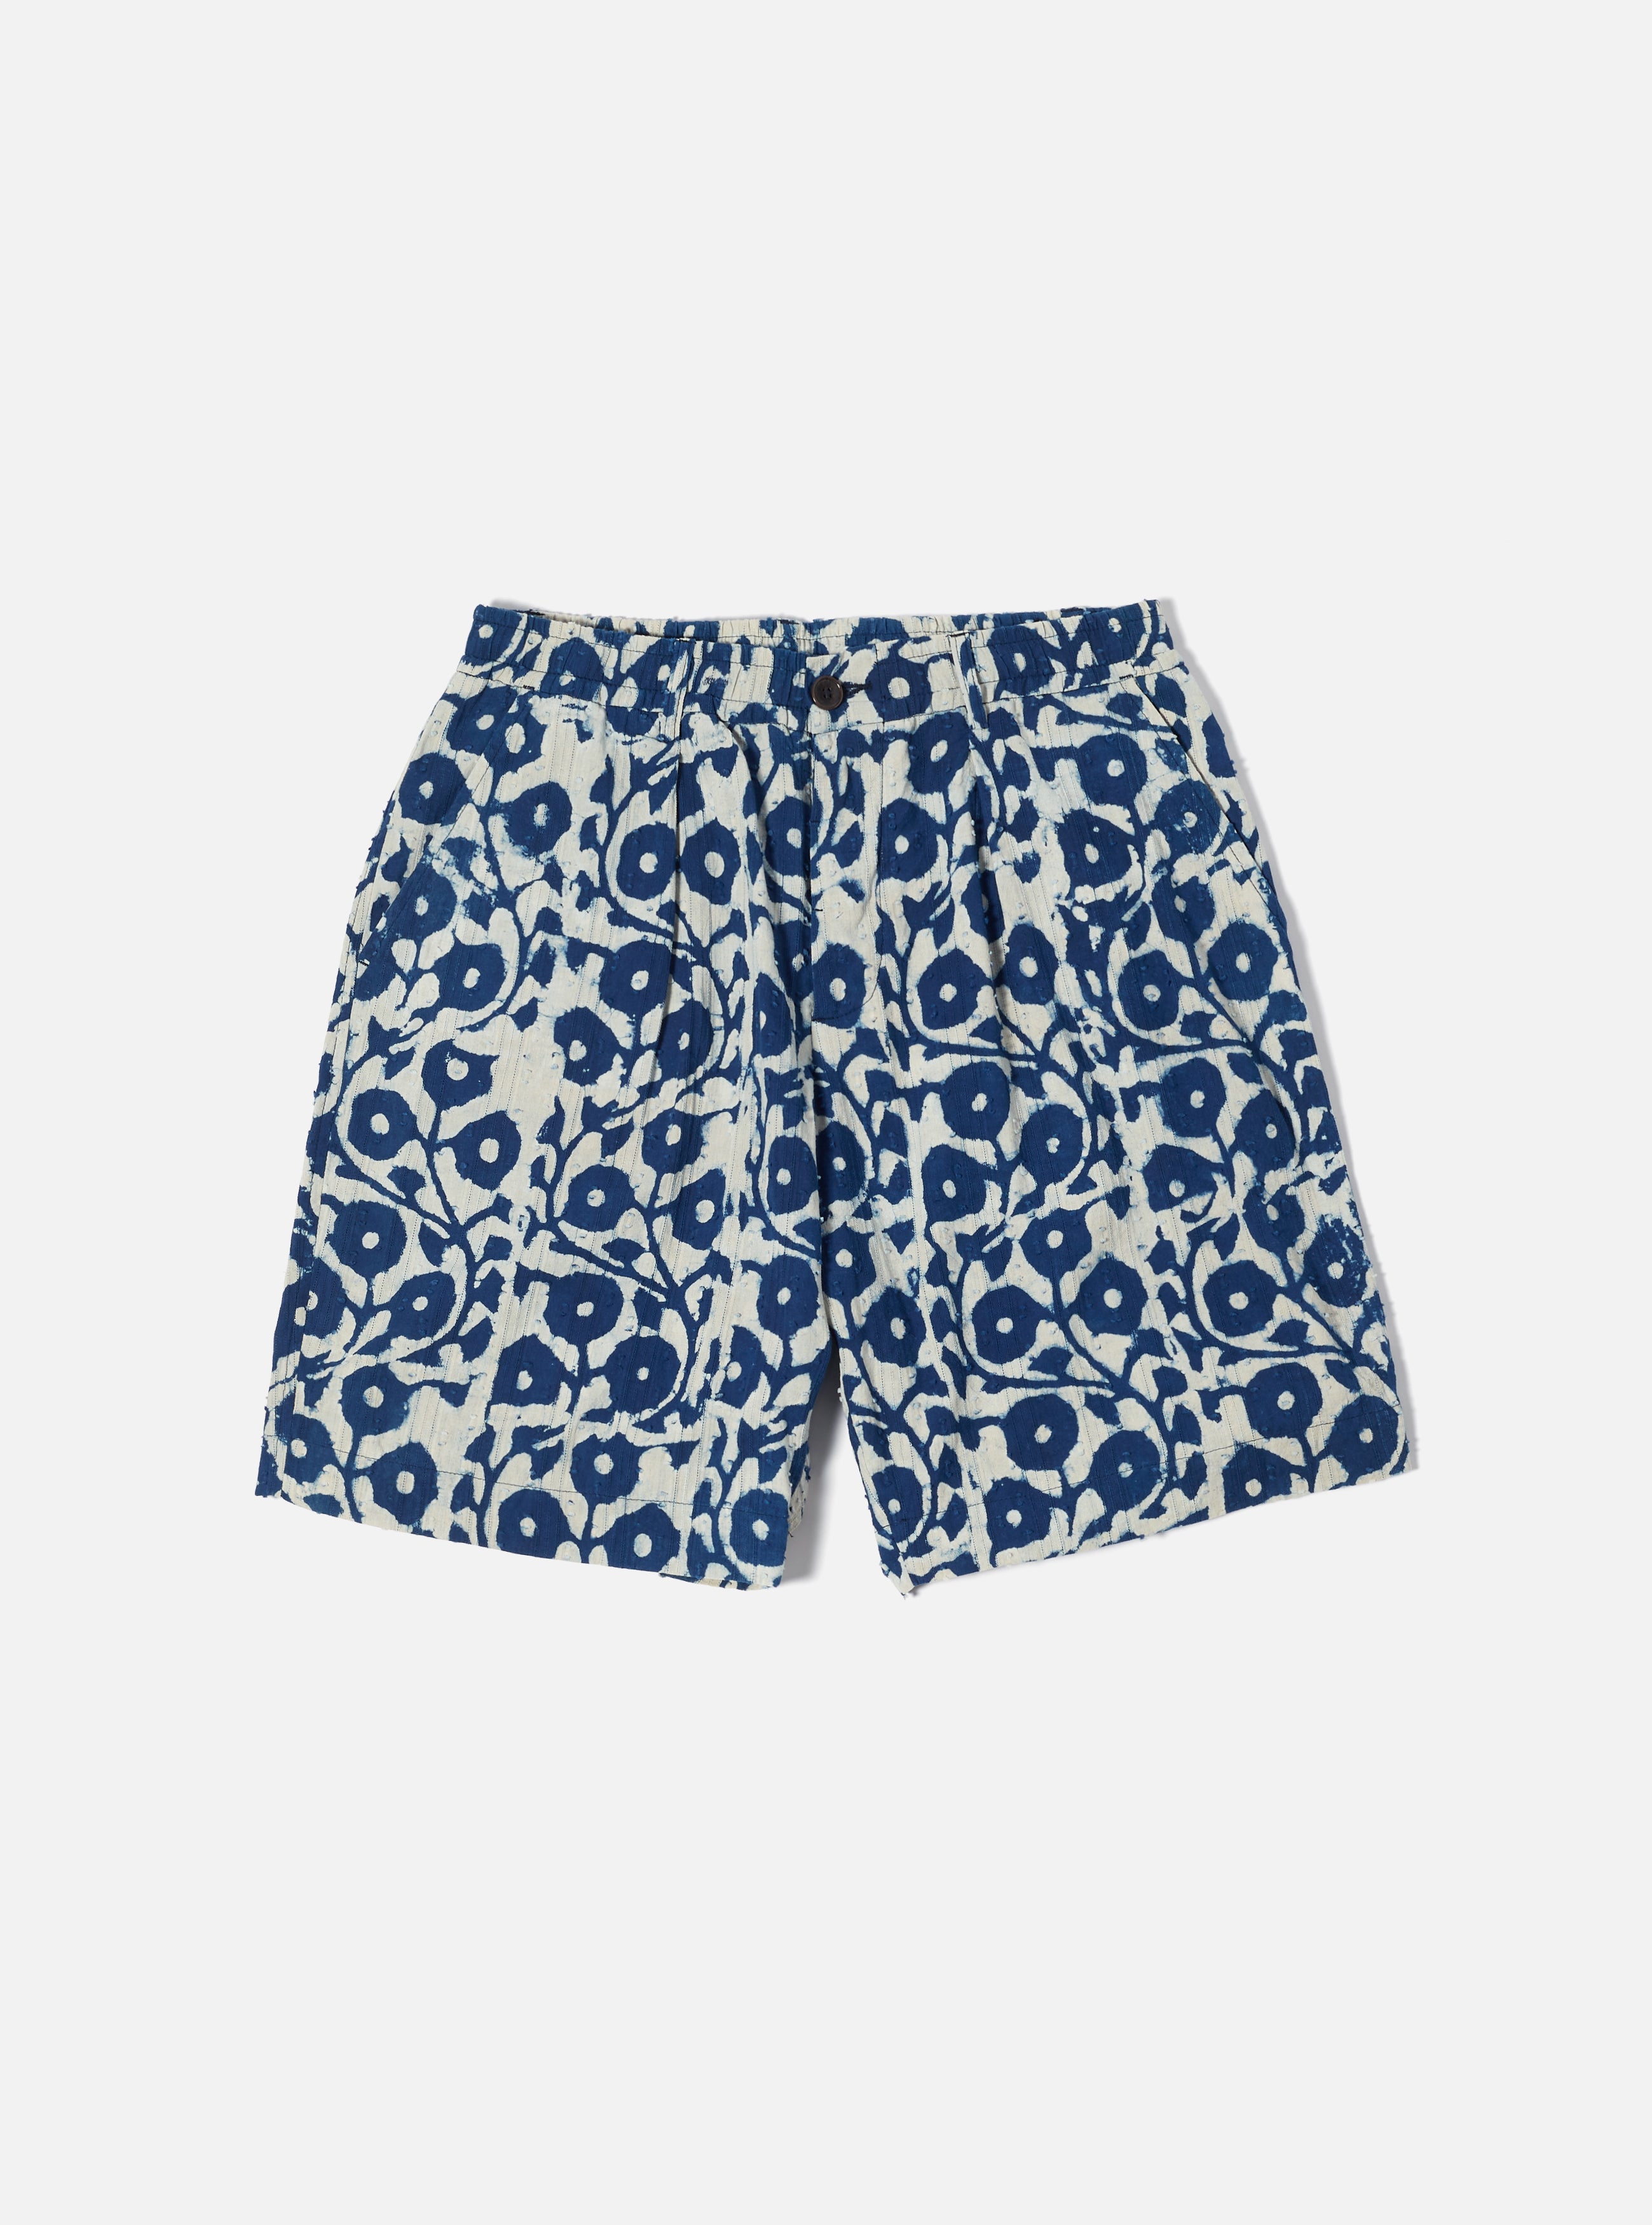 The 'Pleated Track Short' is a super-loose but smart-looking short with an elasticated waist and pleated front. A unique jacquard textured cotton cloth, hand-finished with block-printed indigo flower patterns. Fabric Content: 100% Cotton.